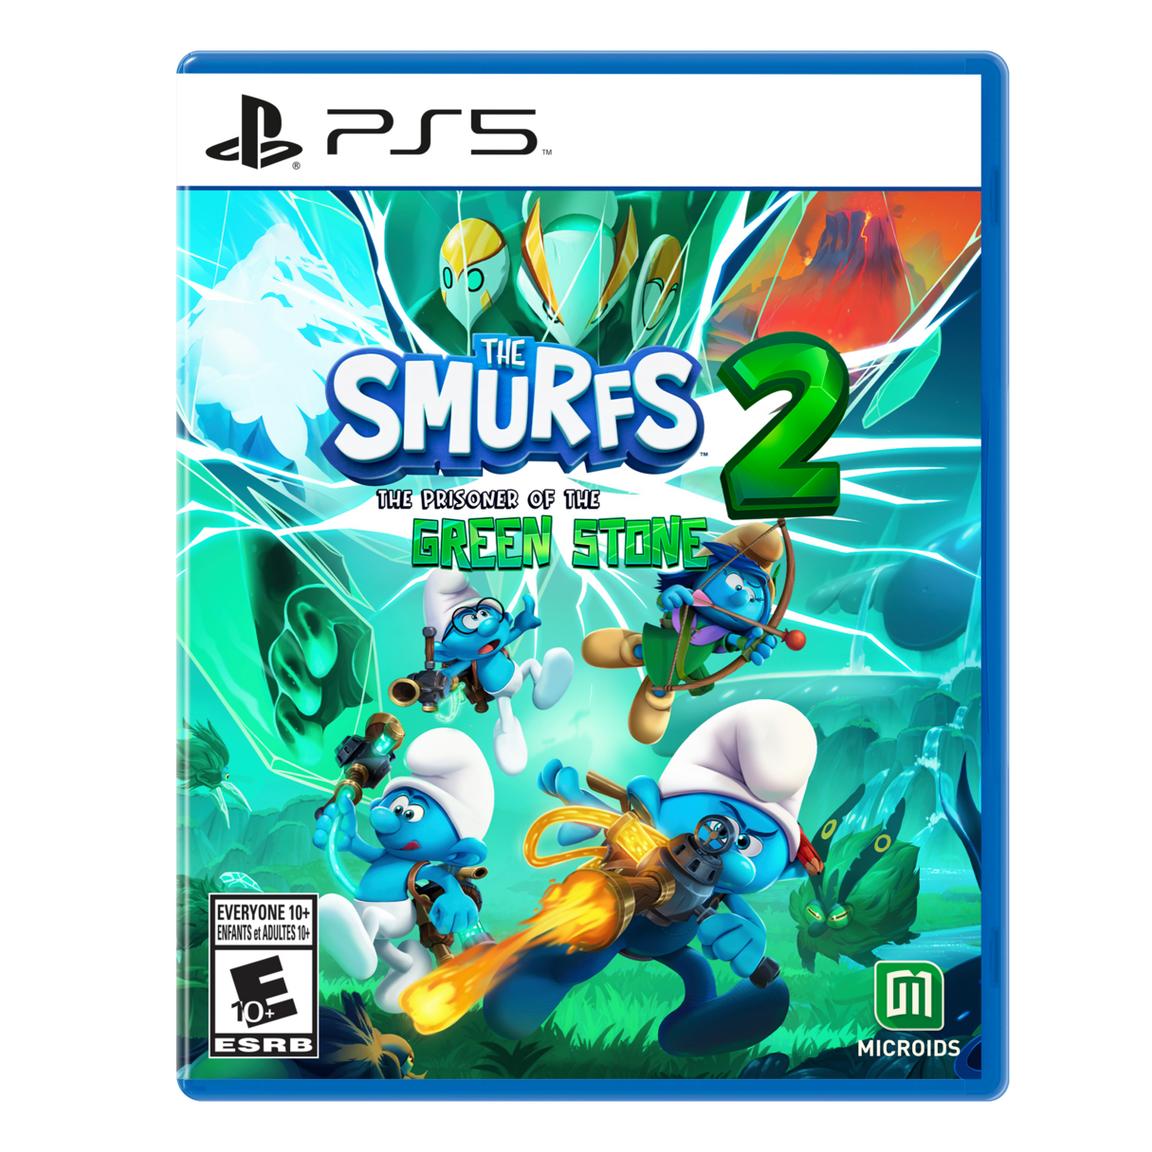 Видеоигра The Smurfs 2: Prisoner of the Green Stone - PlayStation 5 ps5 игра microids asterix